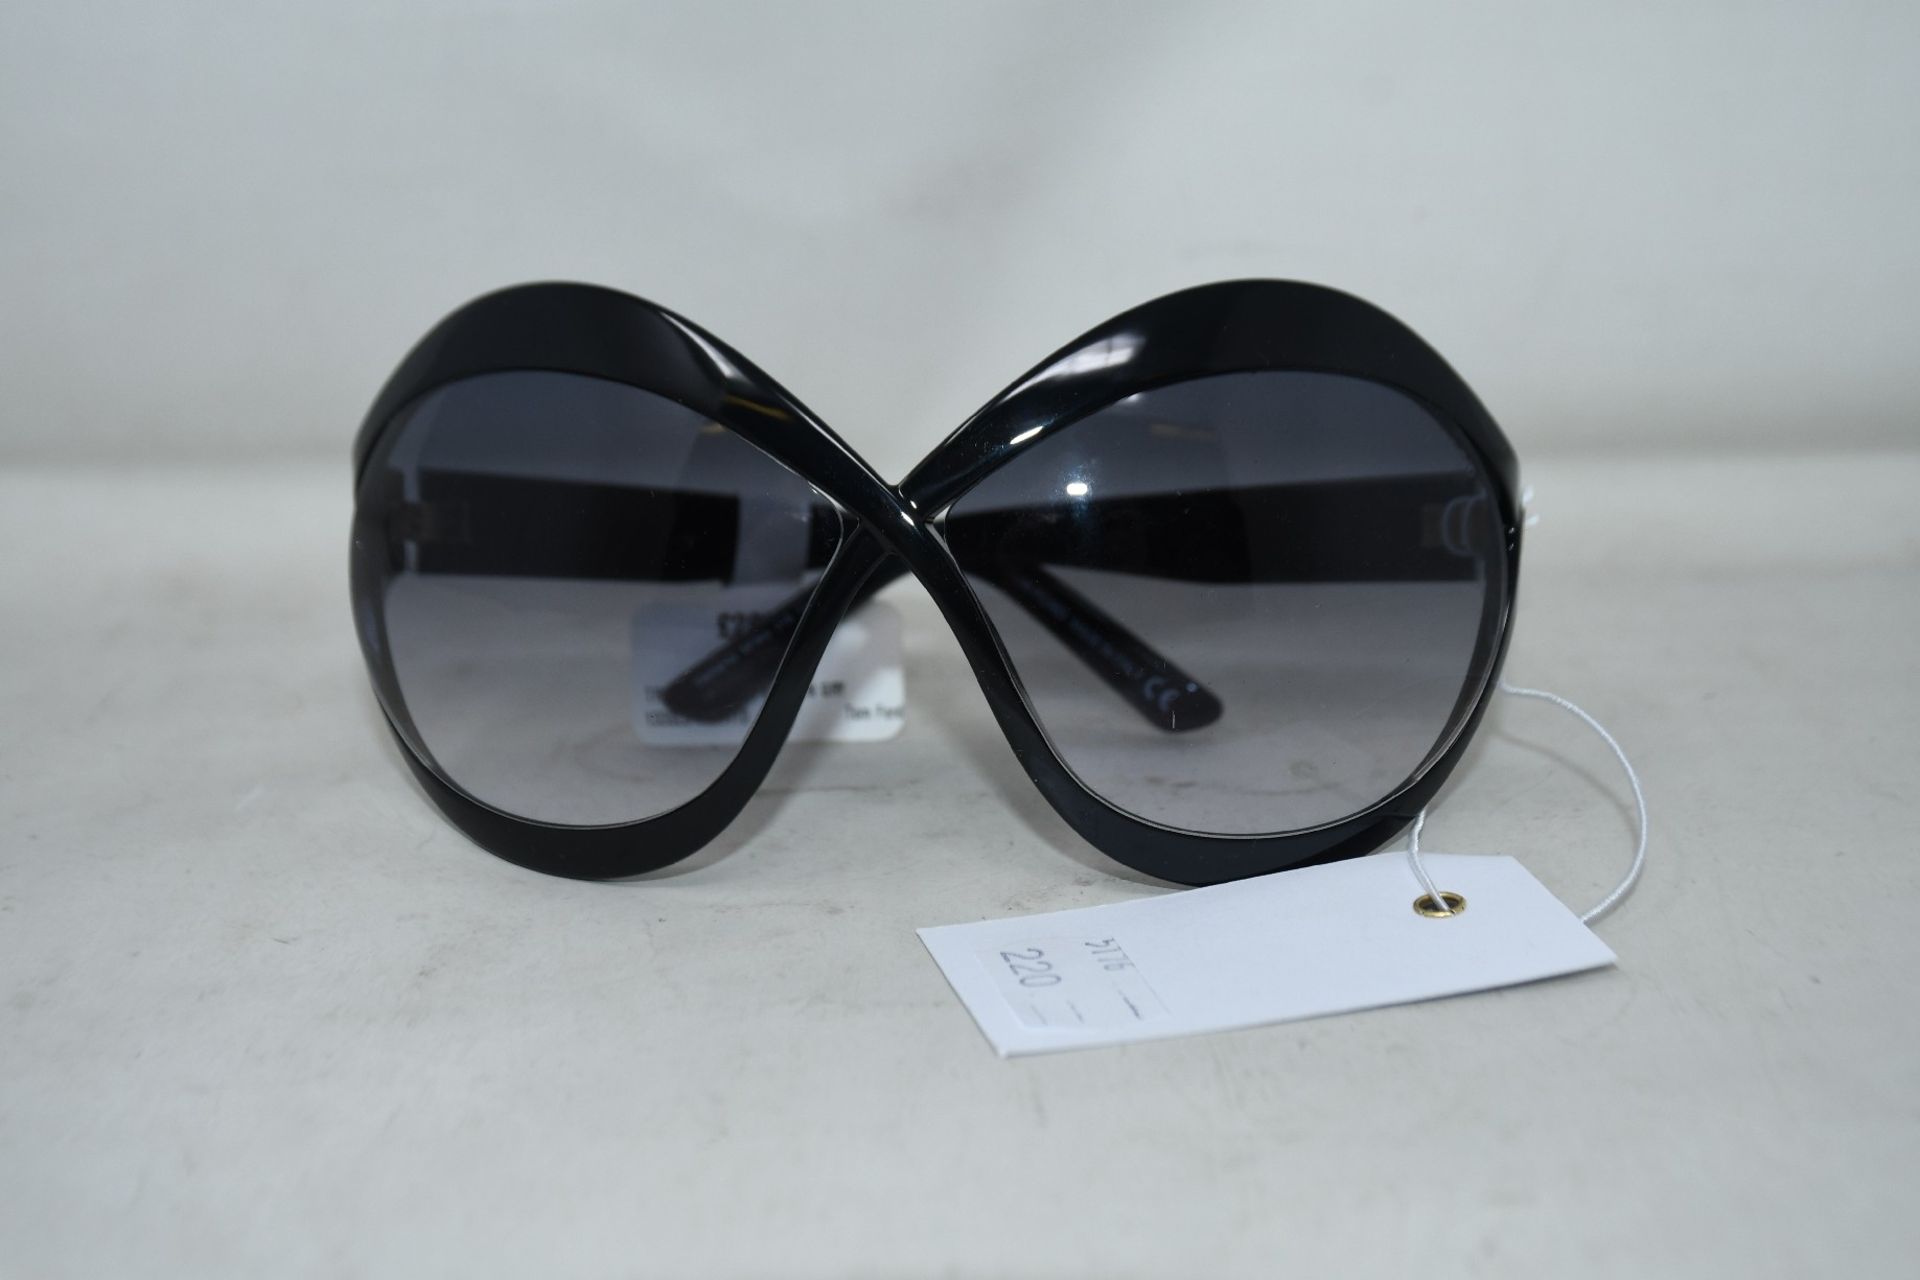 A pair of as new Tom Ford sunglasses (No case - RRP £285).